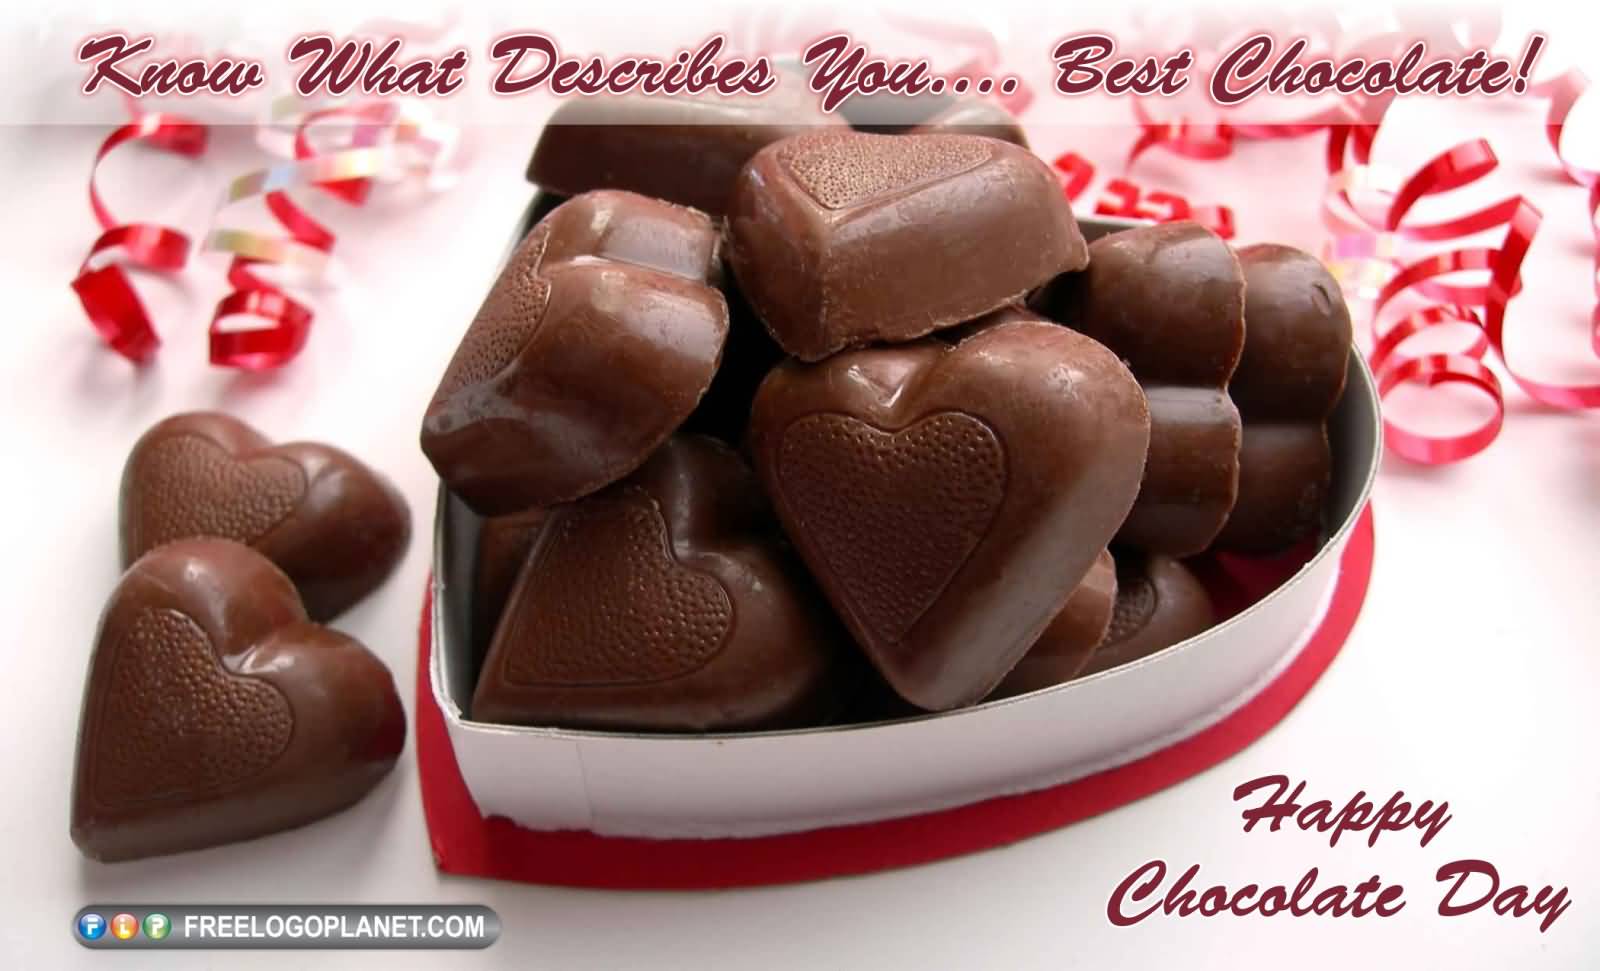 Know What Describes You Best Chocolate Happy Chocolate Day